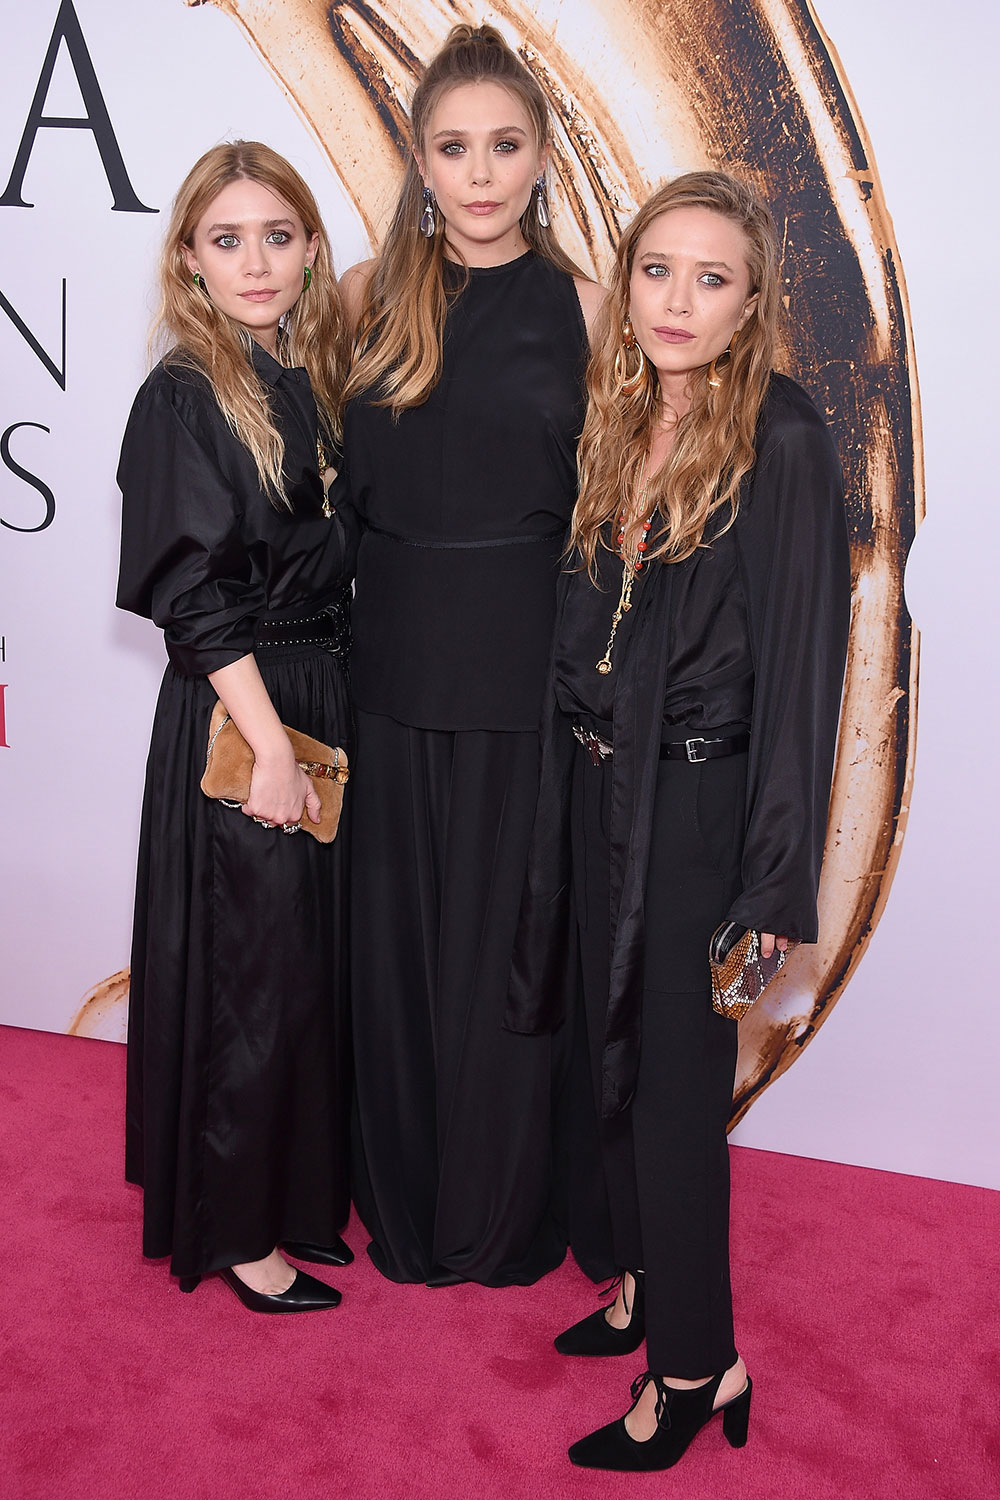 The Olsen sisters channel their inner witchy vibes at the CFDA Awards in New York.